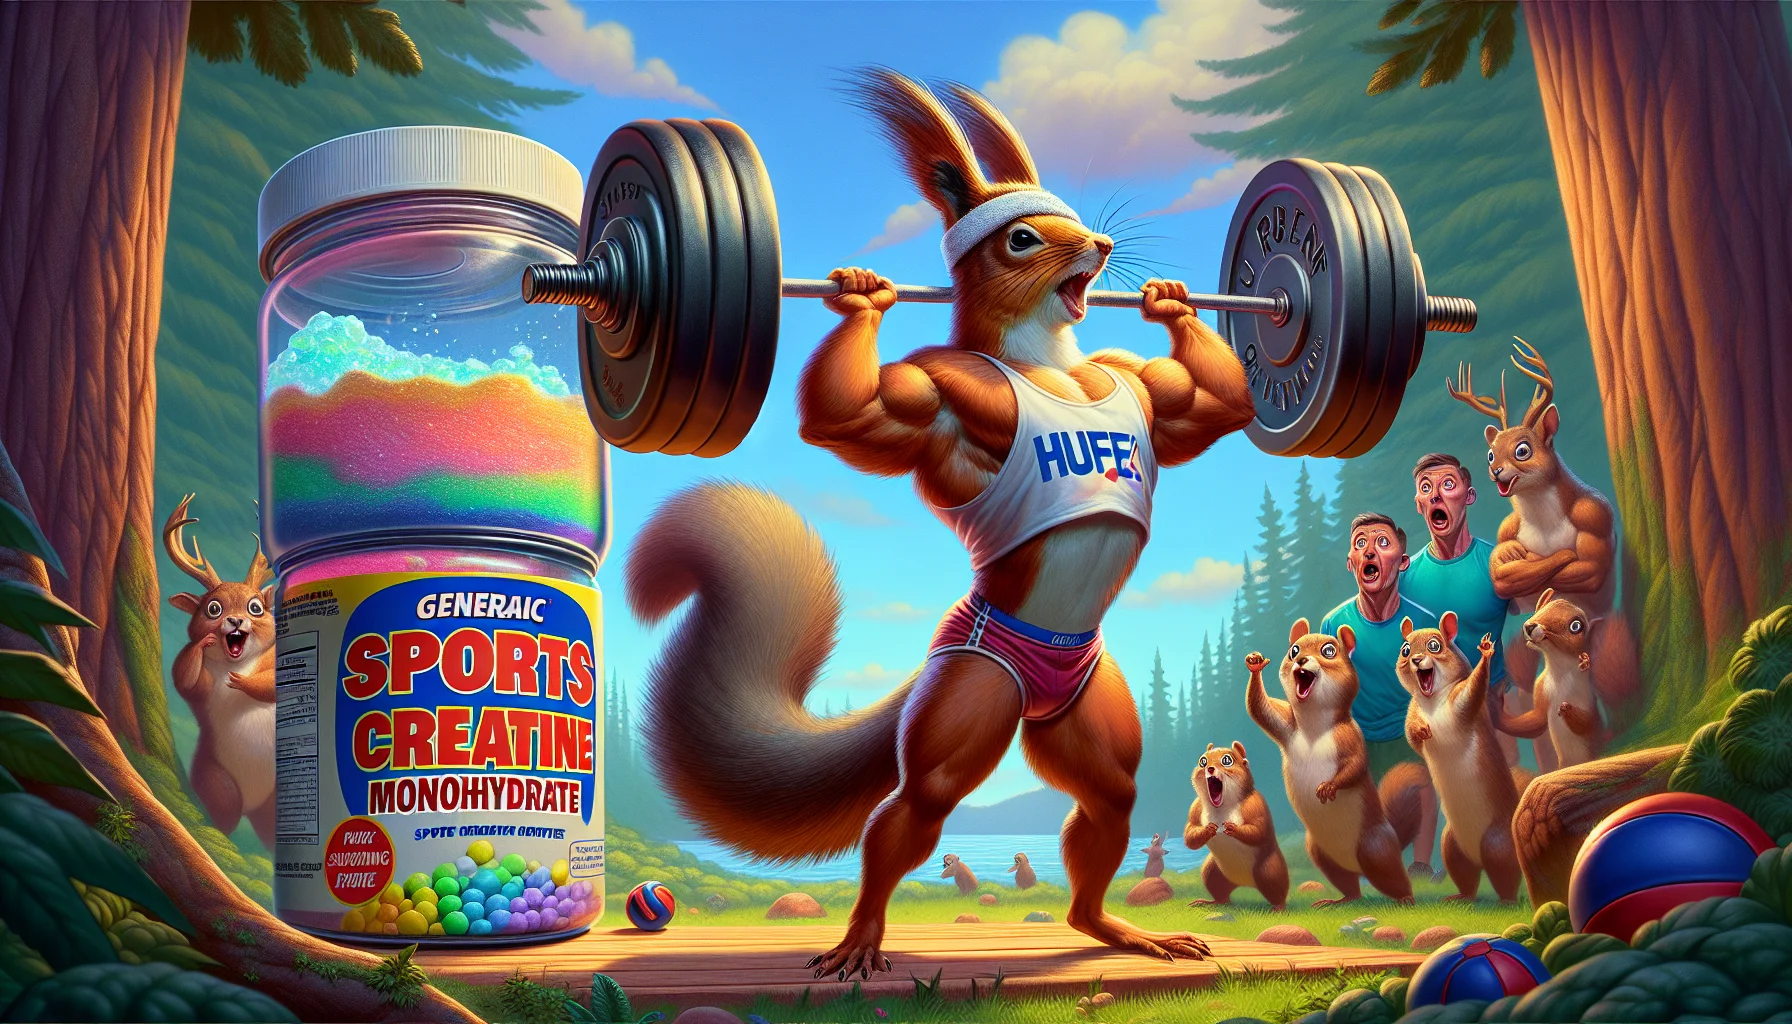 Imagine a creatively humorous scenario promoting the use of generic sports supplements. In the foreground, there's a jam jar filled with a crystalline substance labeled as 'Sports Creatine Monohydrate.' On the side, an overly muscular cartoon squirrel with a sweatband is lifting weights with incredible ease. Behind, a group of surprised woodland creatures are watching the spectacle, their mouths open in astonishment. The background consists of vibrant forest scenery. The illustrative style is hyper-realistic with sharp details and vivid colors. This whole scene is meant to encourage the use of supplements in sports.